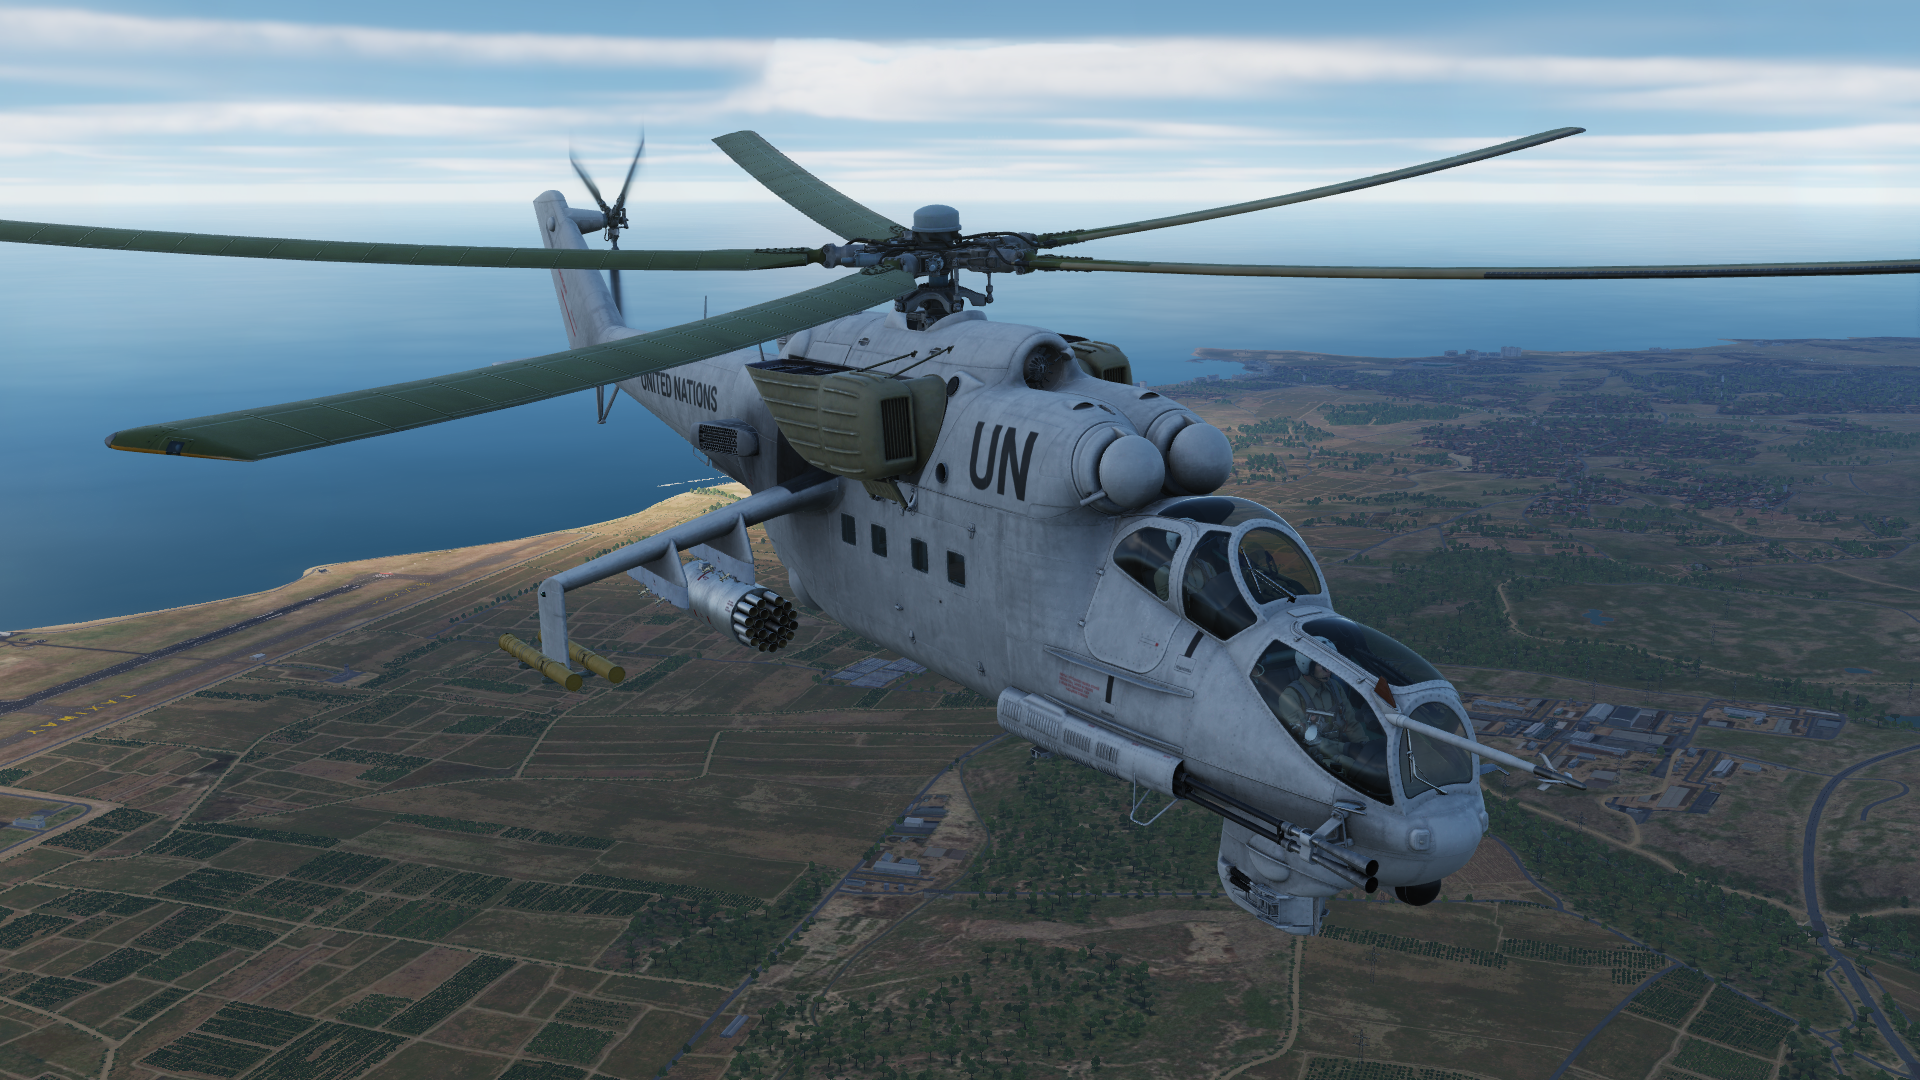 Digital Combat Simulator Dcs World Video Games Airplane Aircraft Helicopters Mil Mi 24 1920x1080